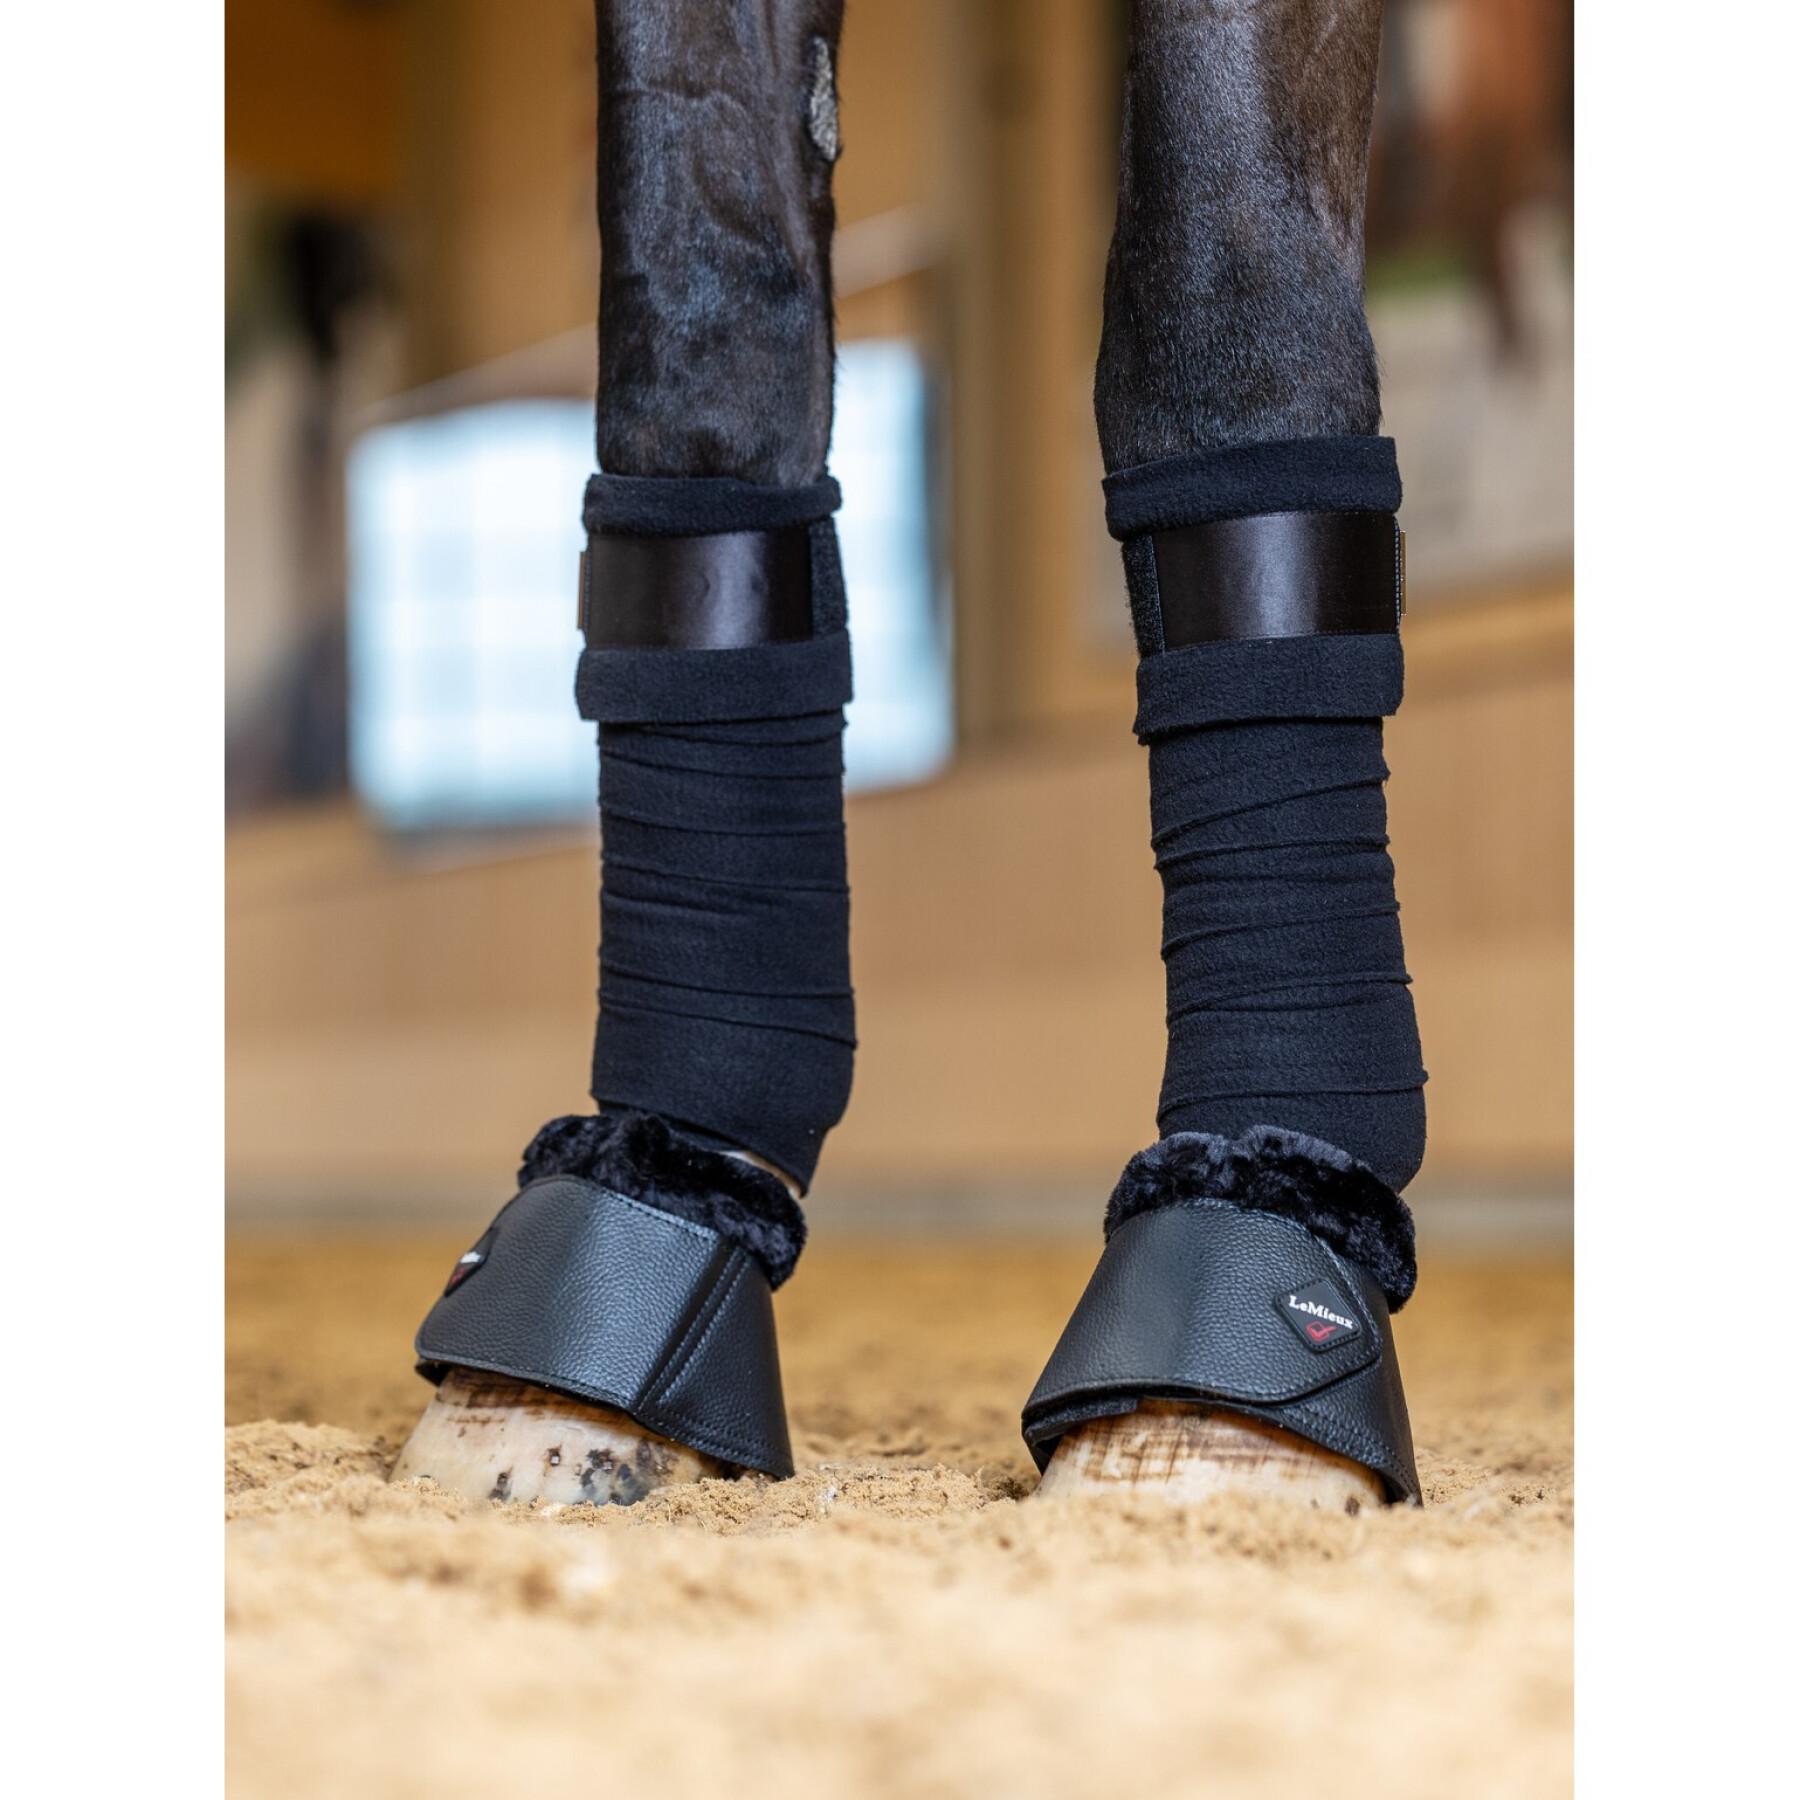 Hind leg gaiters for horses LeMieux WrapRound Over Reach